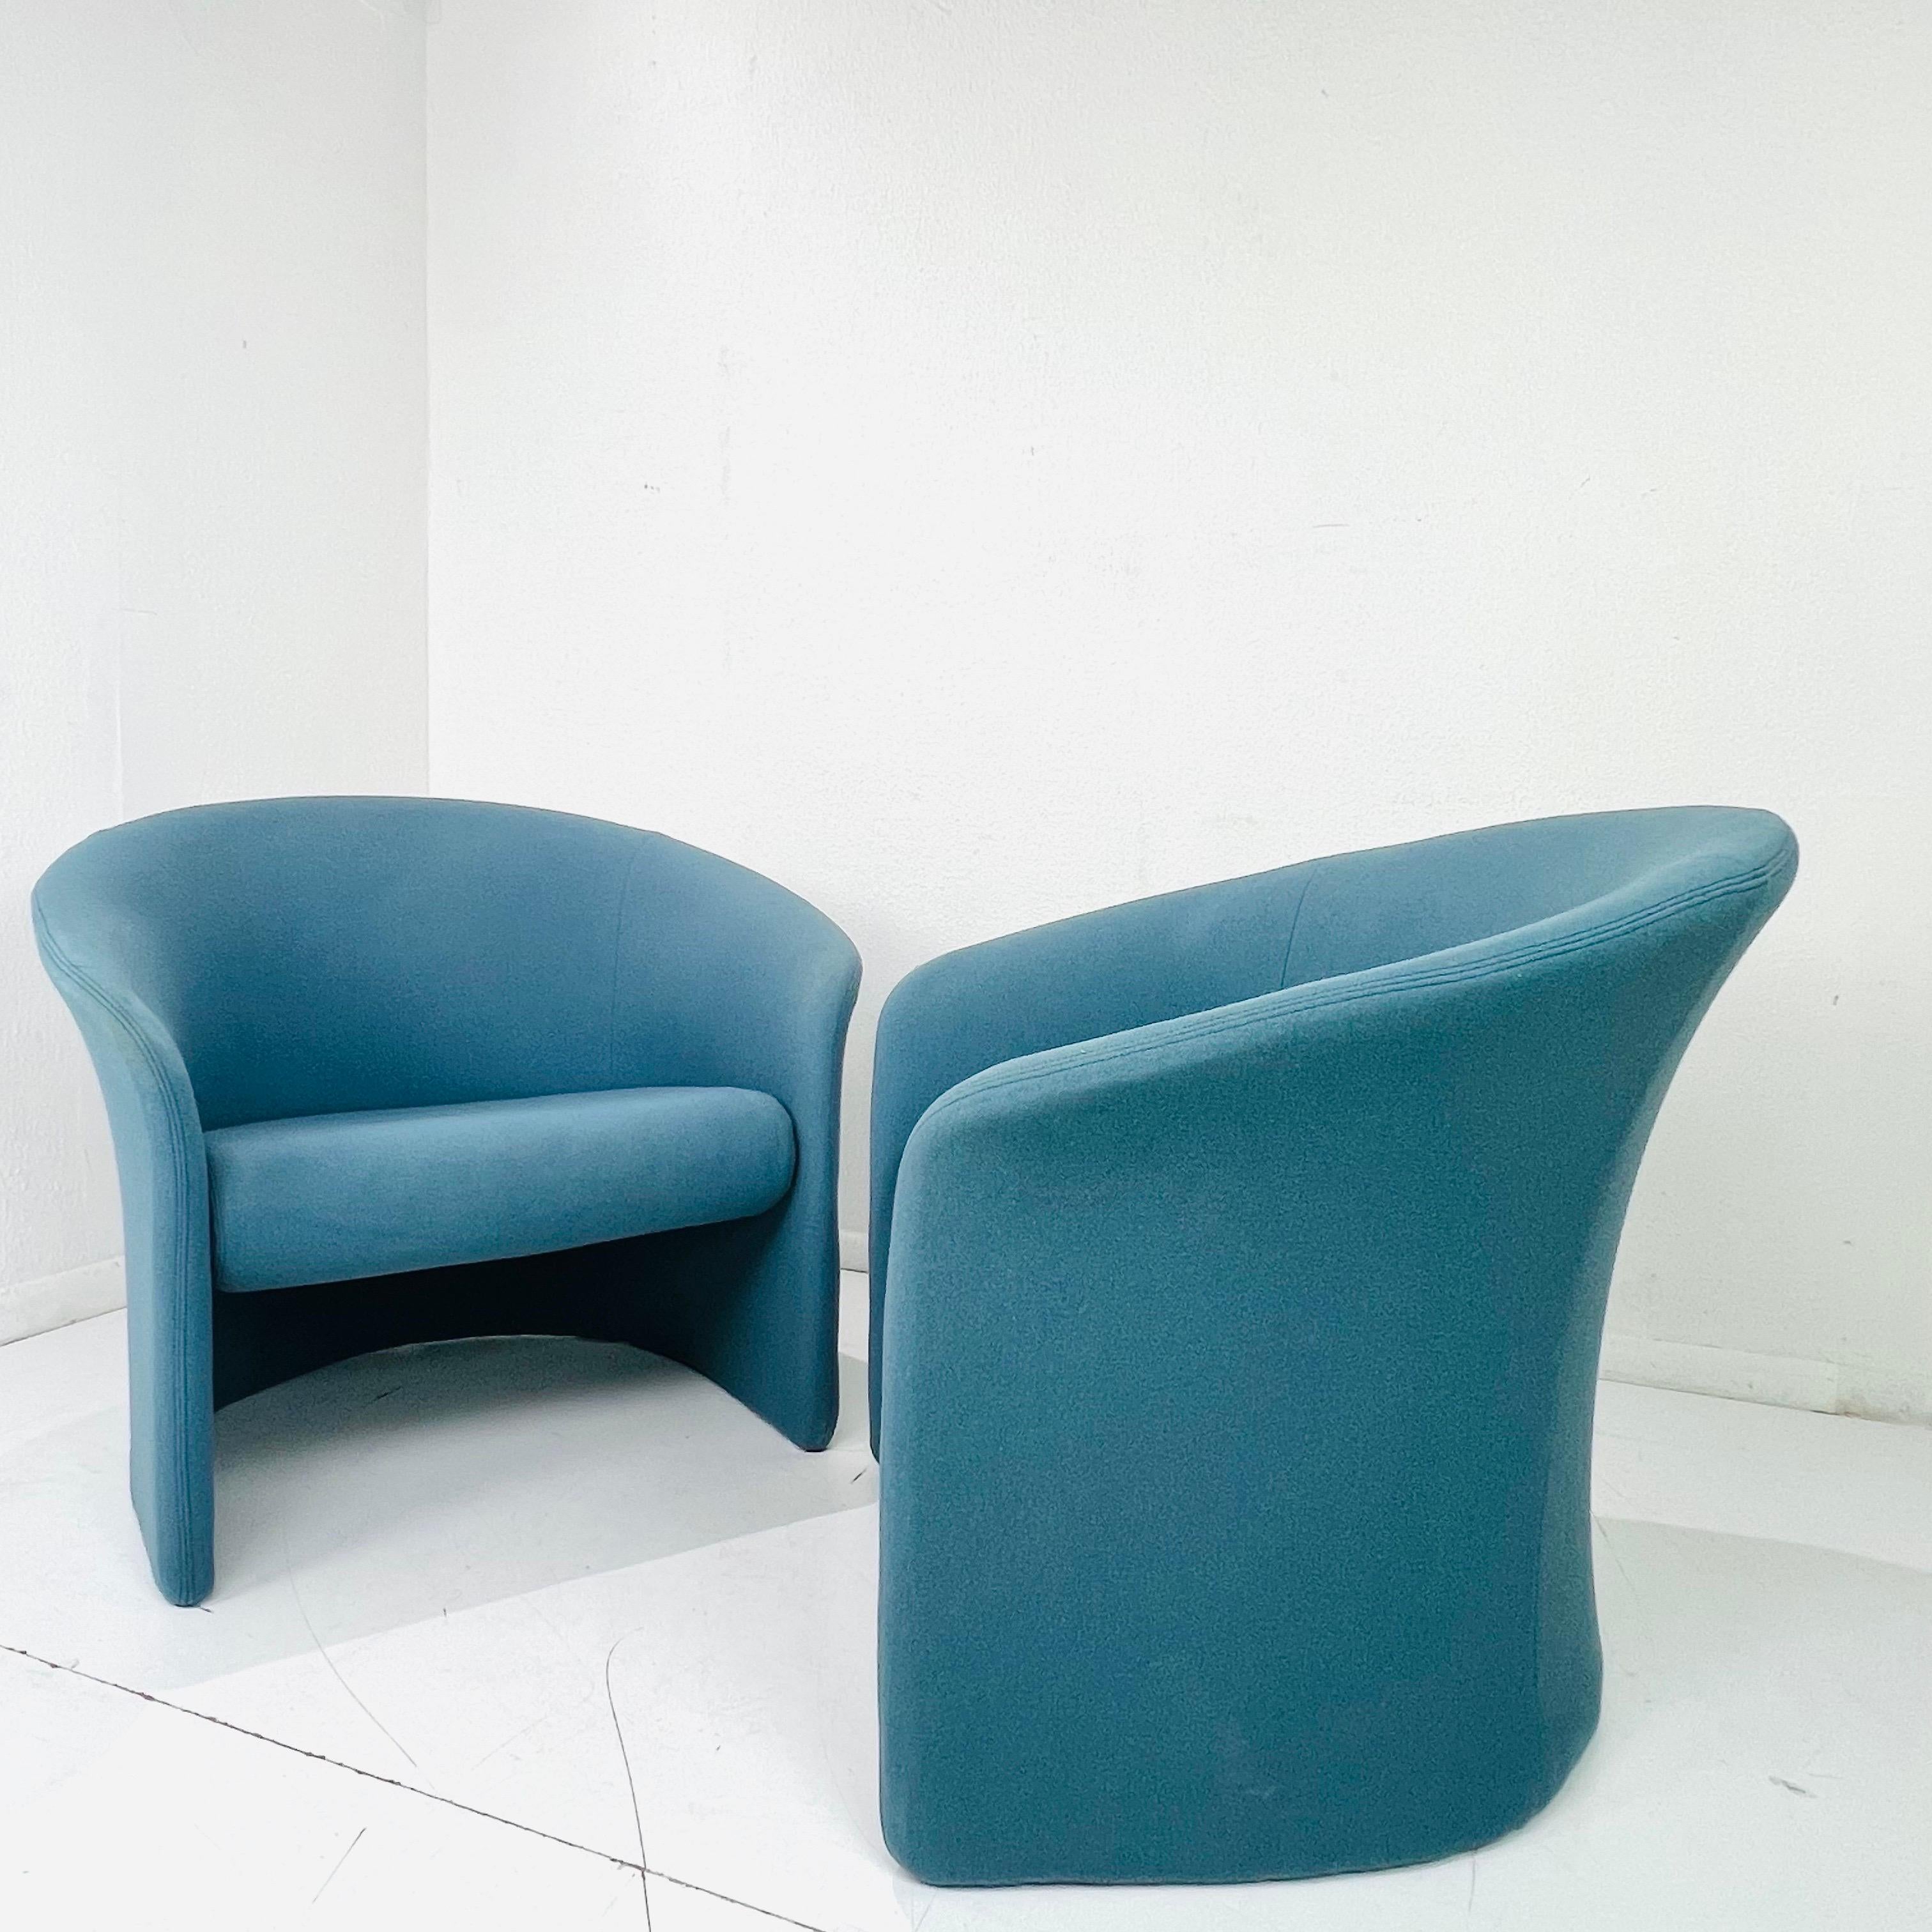 Pair of Postmodern Tub Chairs by Massimo Vignelli For Sale 6